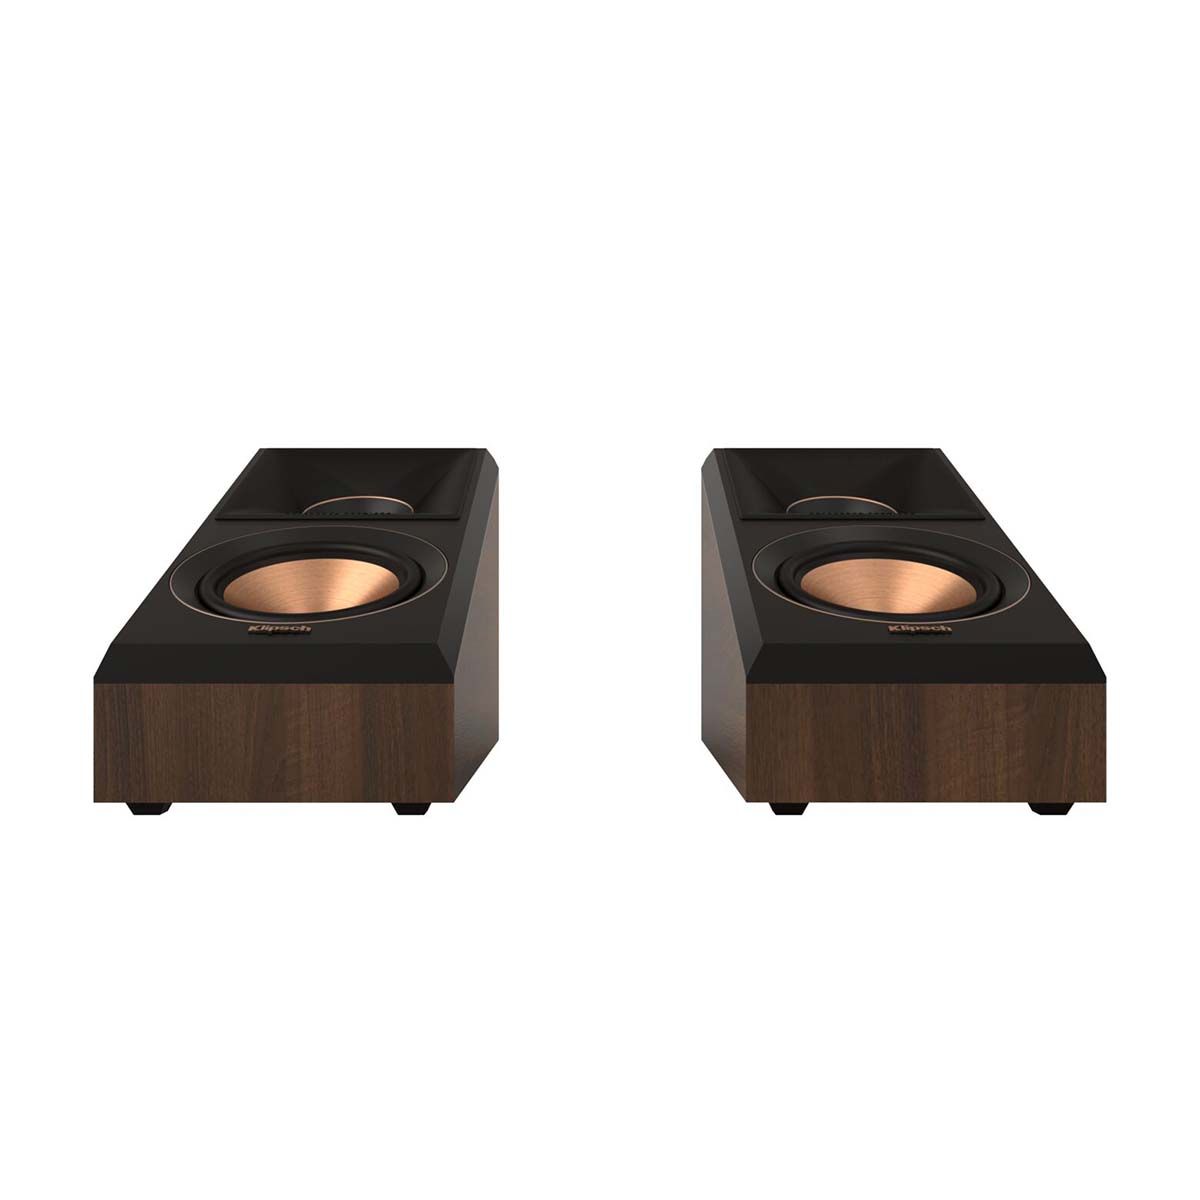 Klipsch RP-500SA II Surround/Atmos Speakers - Walnut - Pair - front view of pair without grills